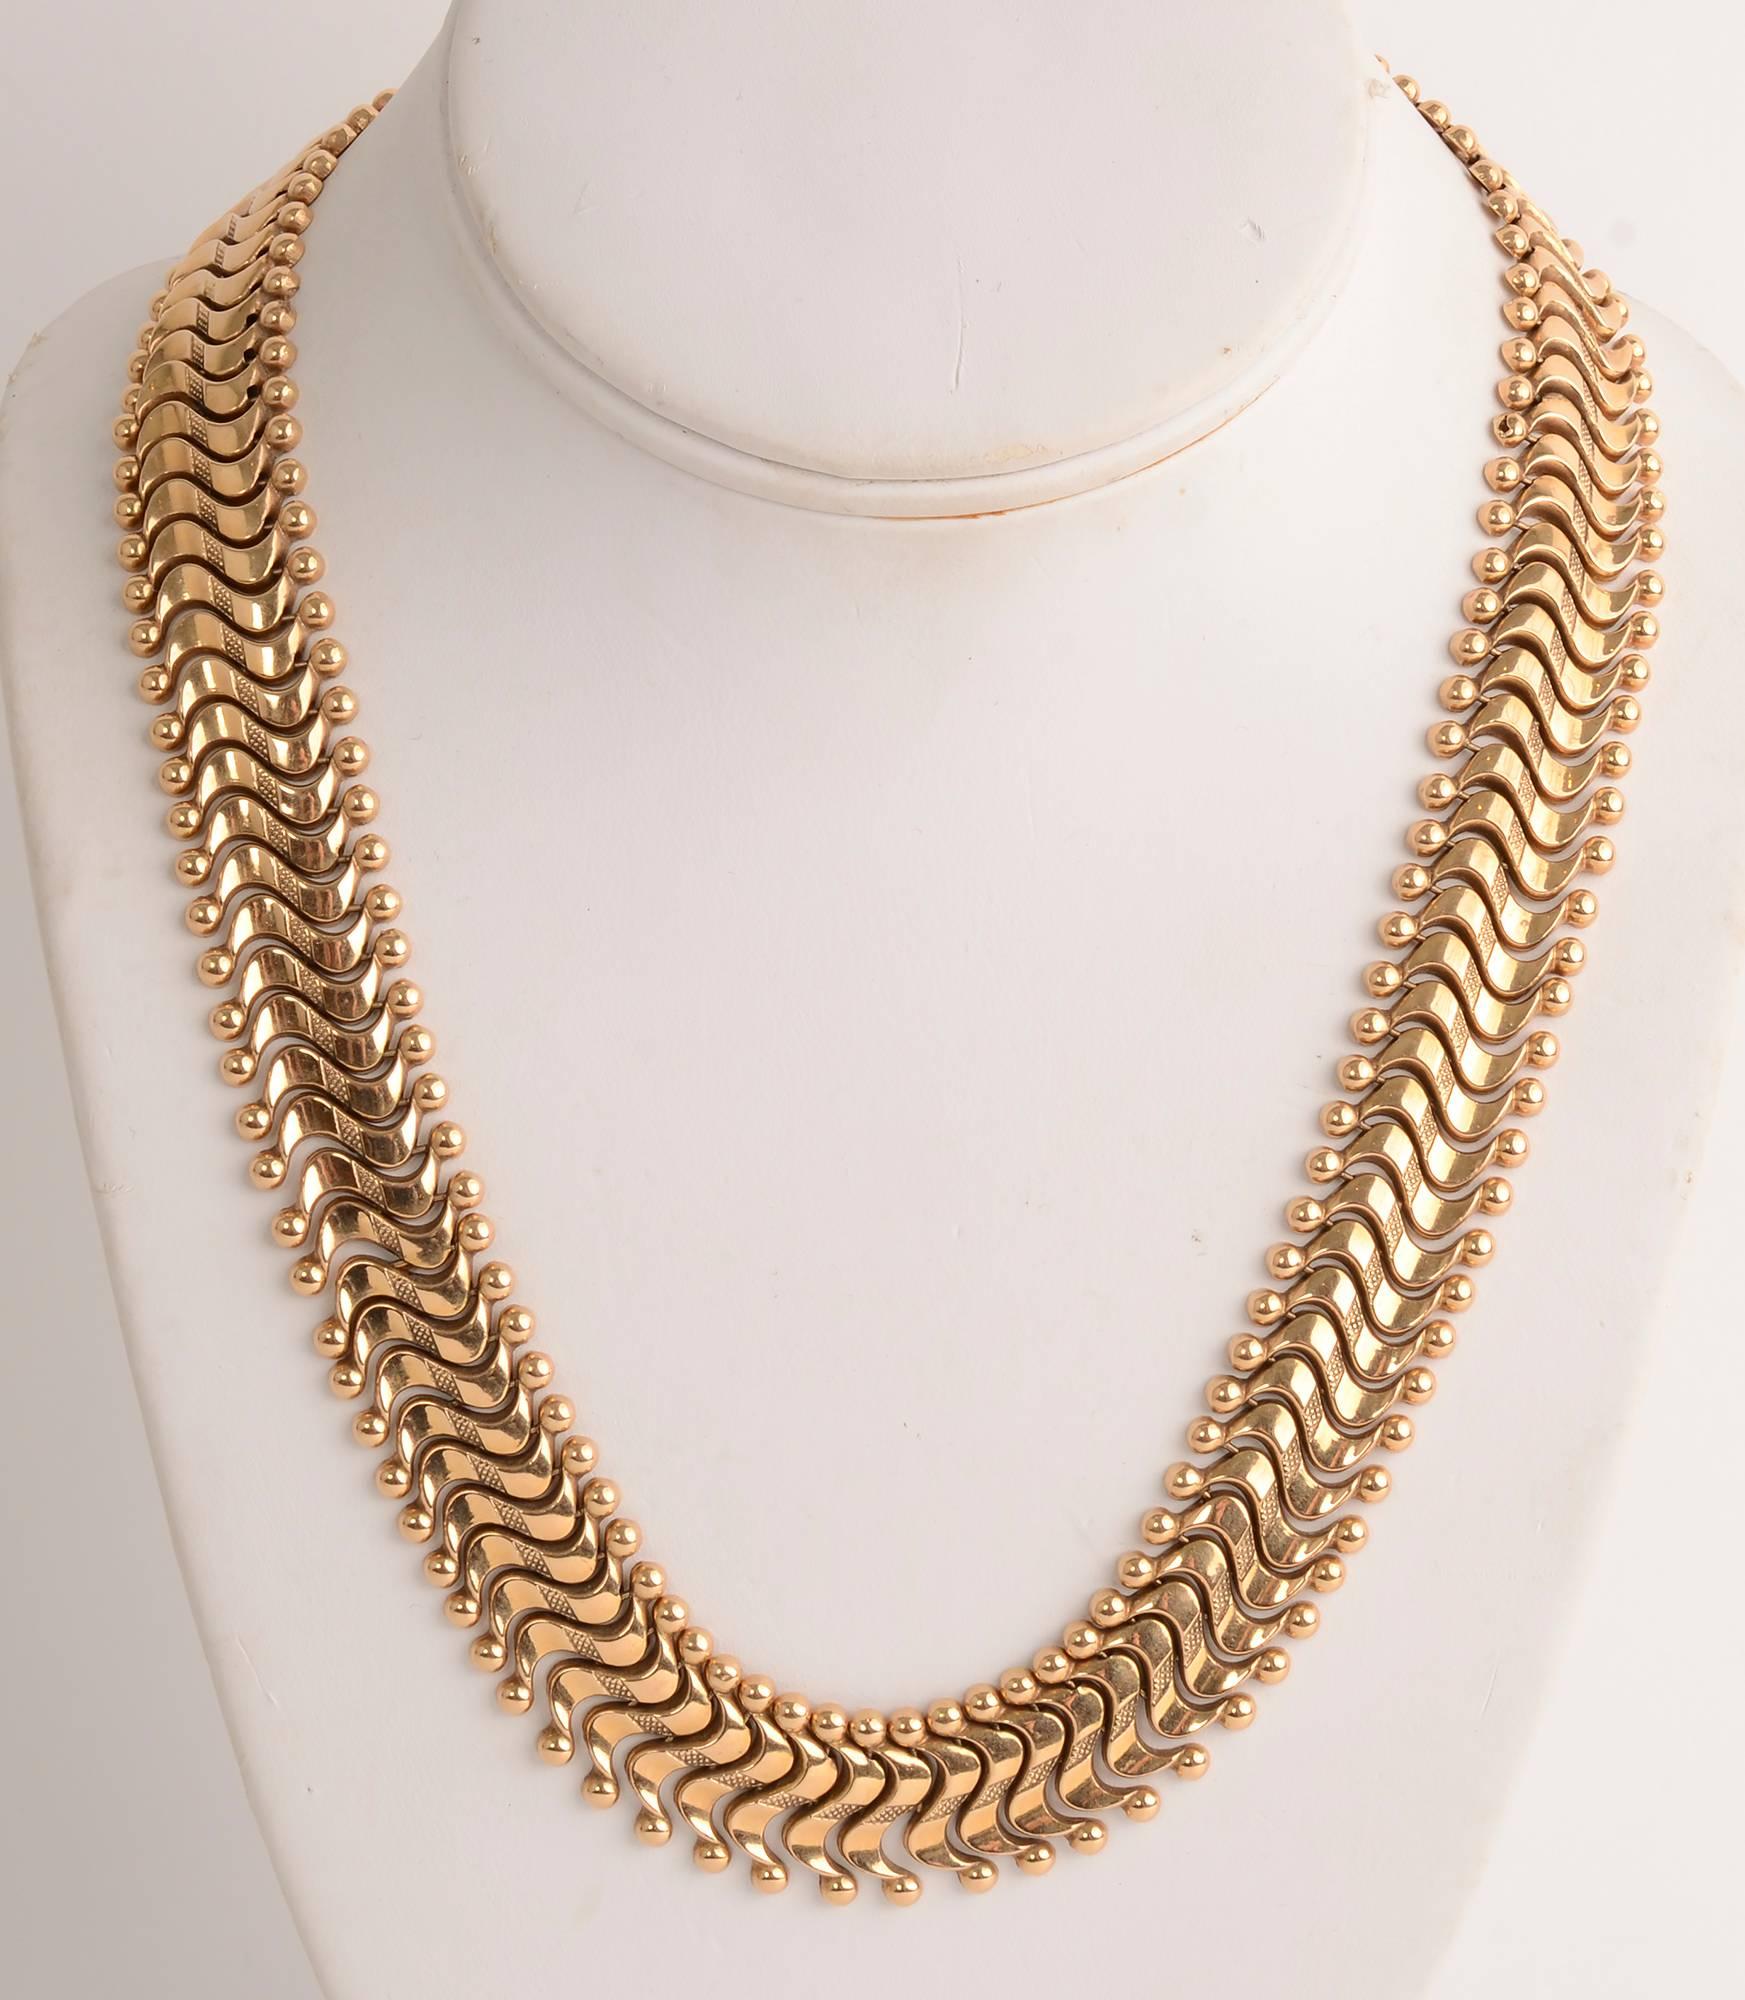 Retro necklace of curvilinear links of 18 karat gold. The necklace is 19 inches long and the links are 3/4 inch wide. The necklace is especially flexible and comfortable to wear.